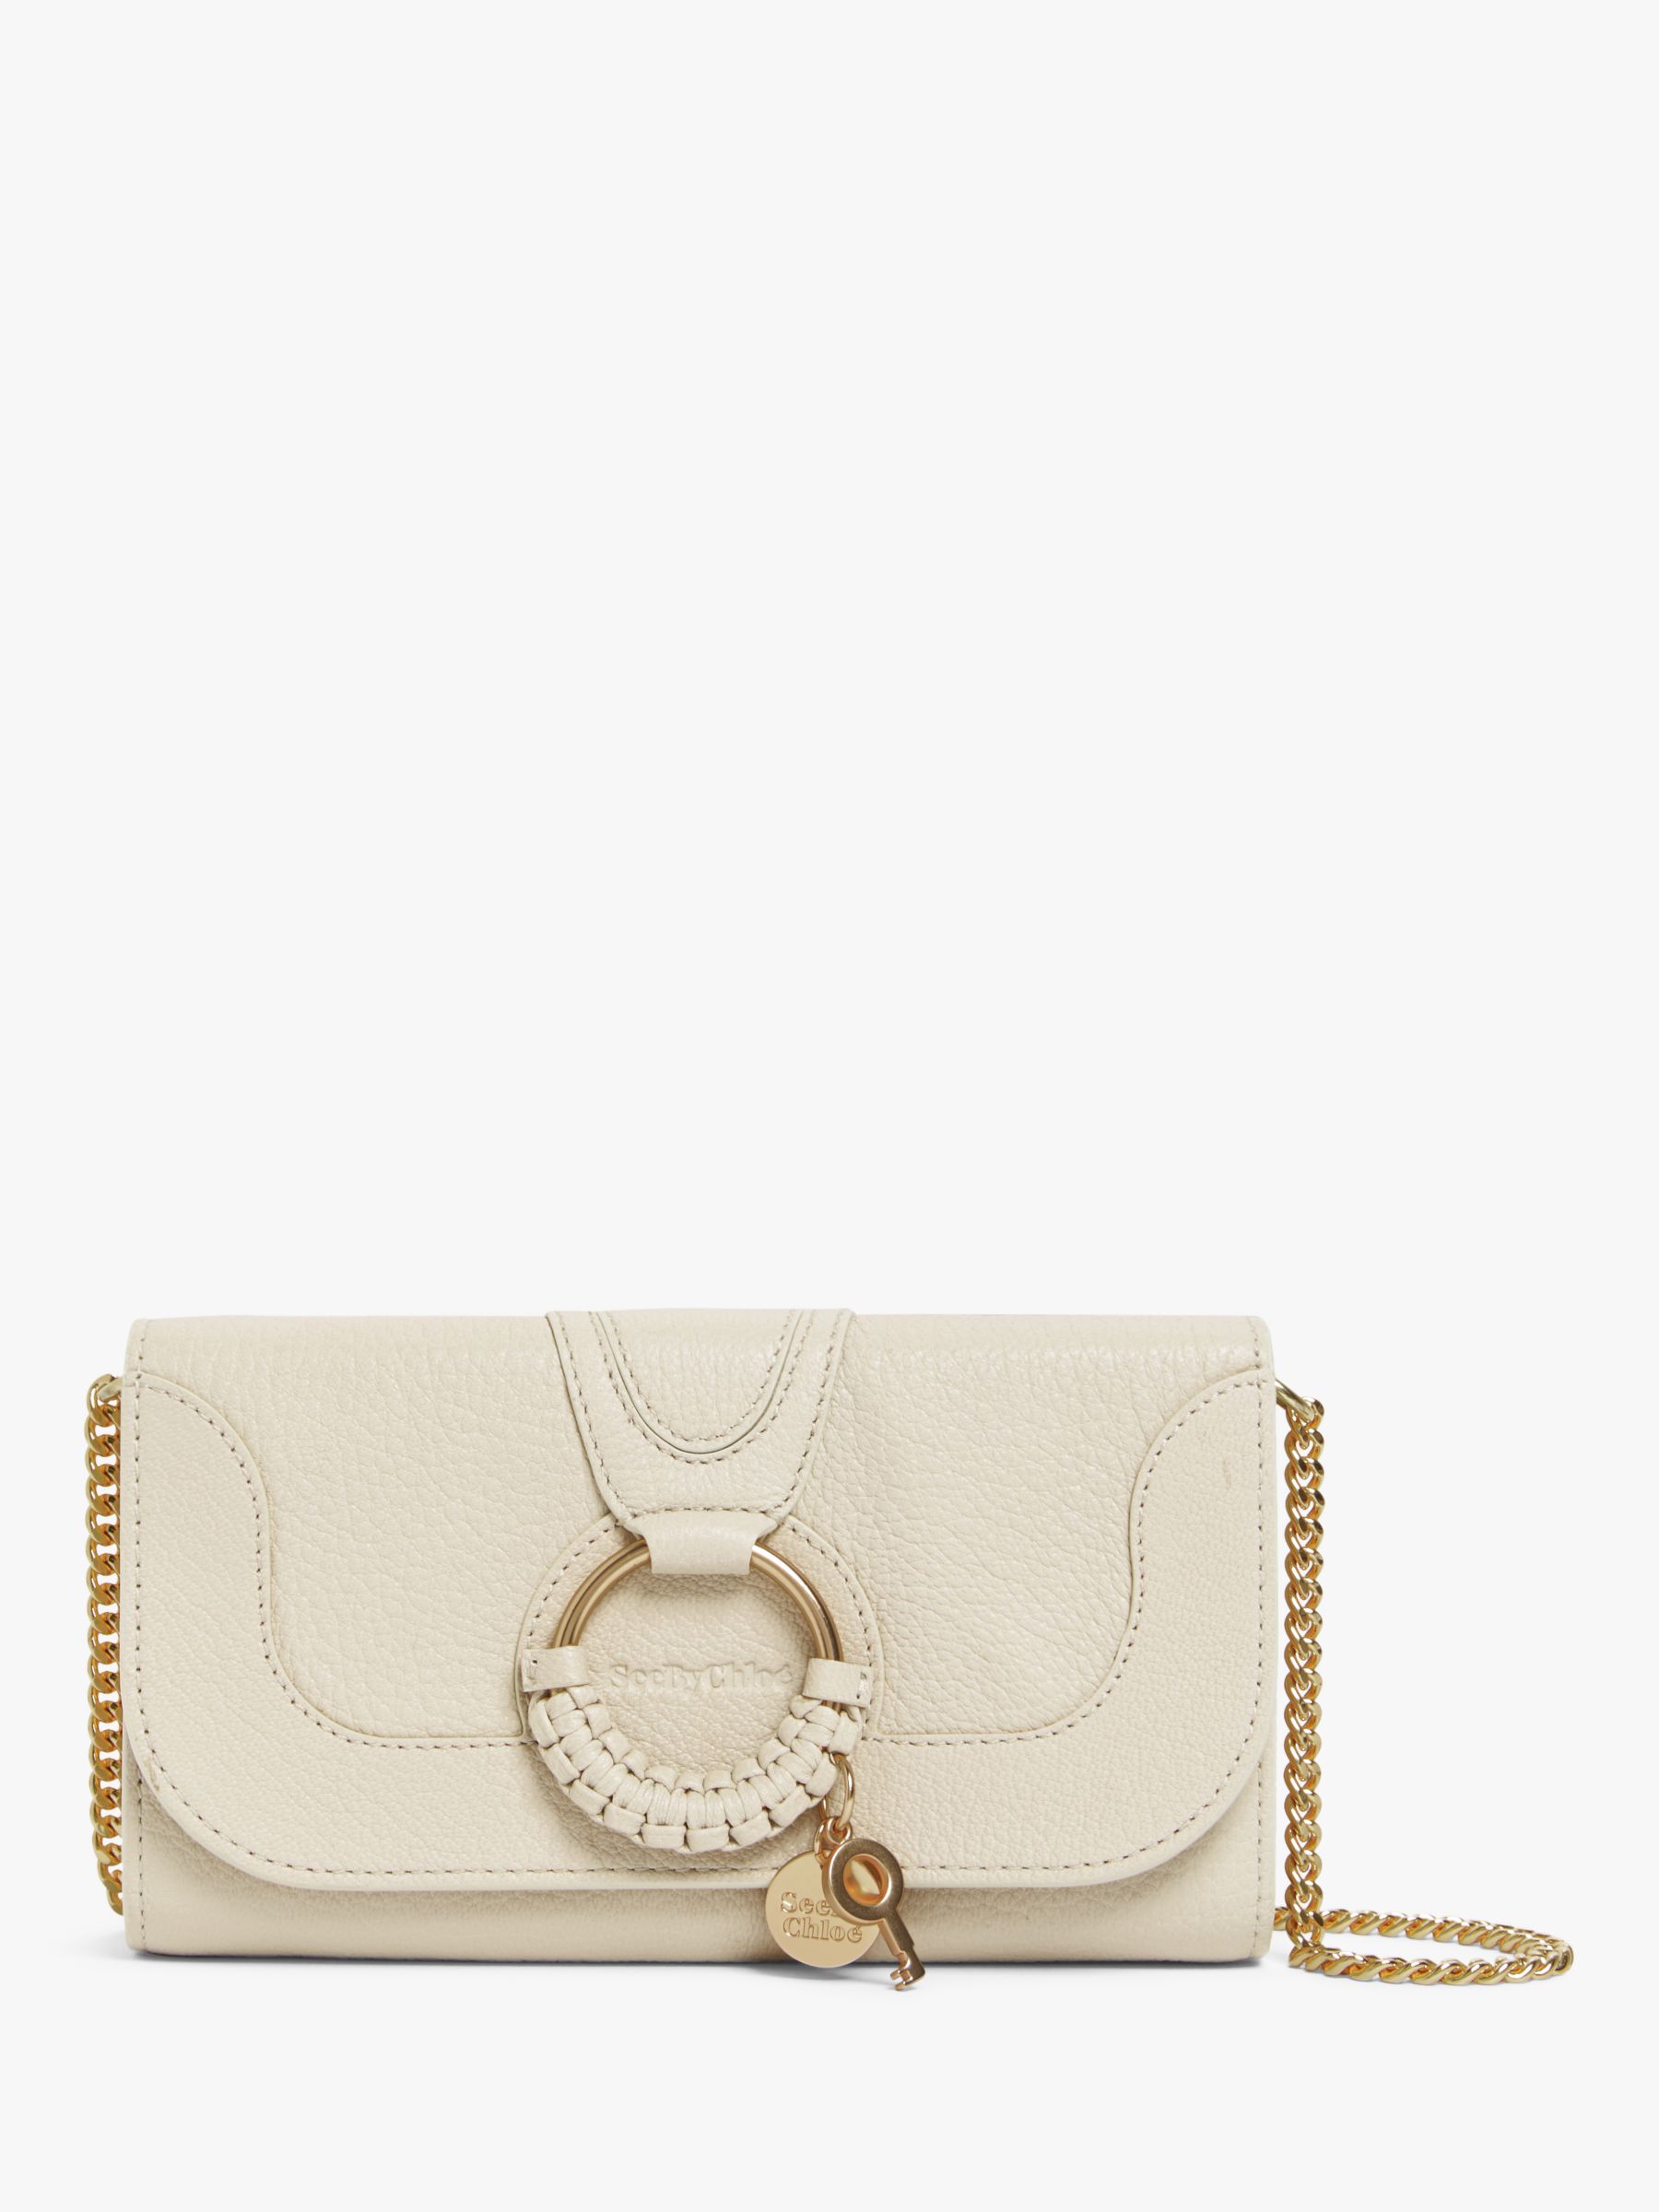 Buy See By Chloé Hana Large Leather Chain Purse Online at johnlewis.com